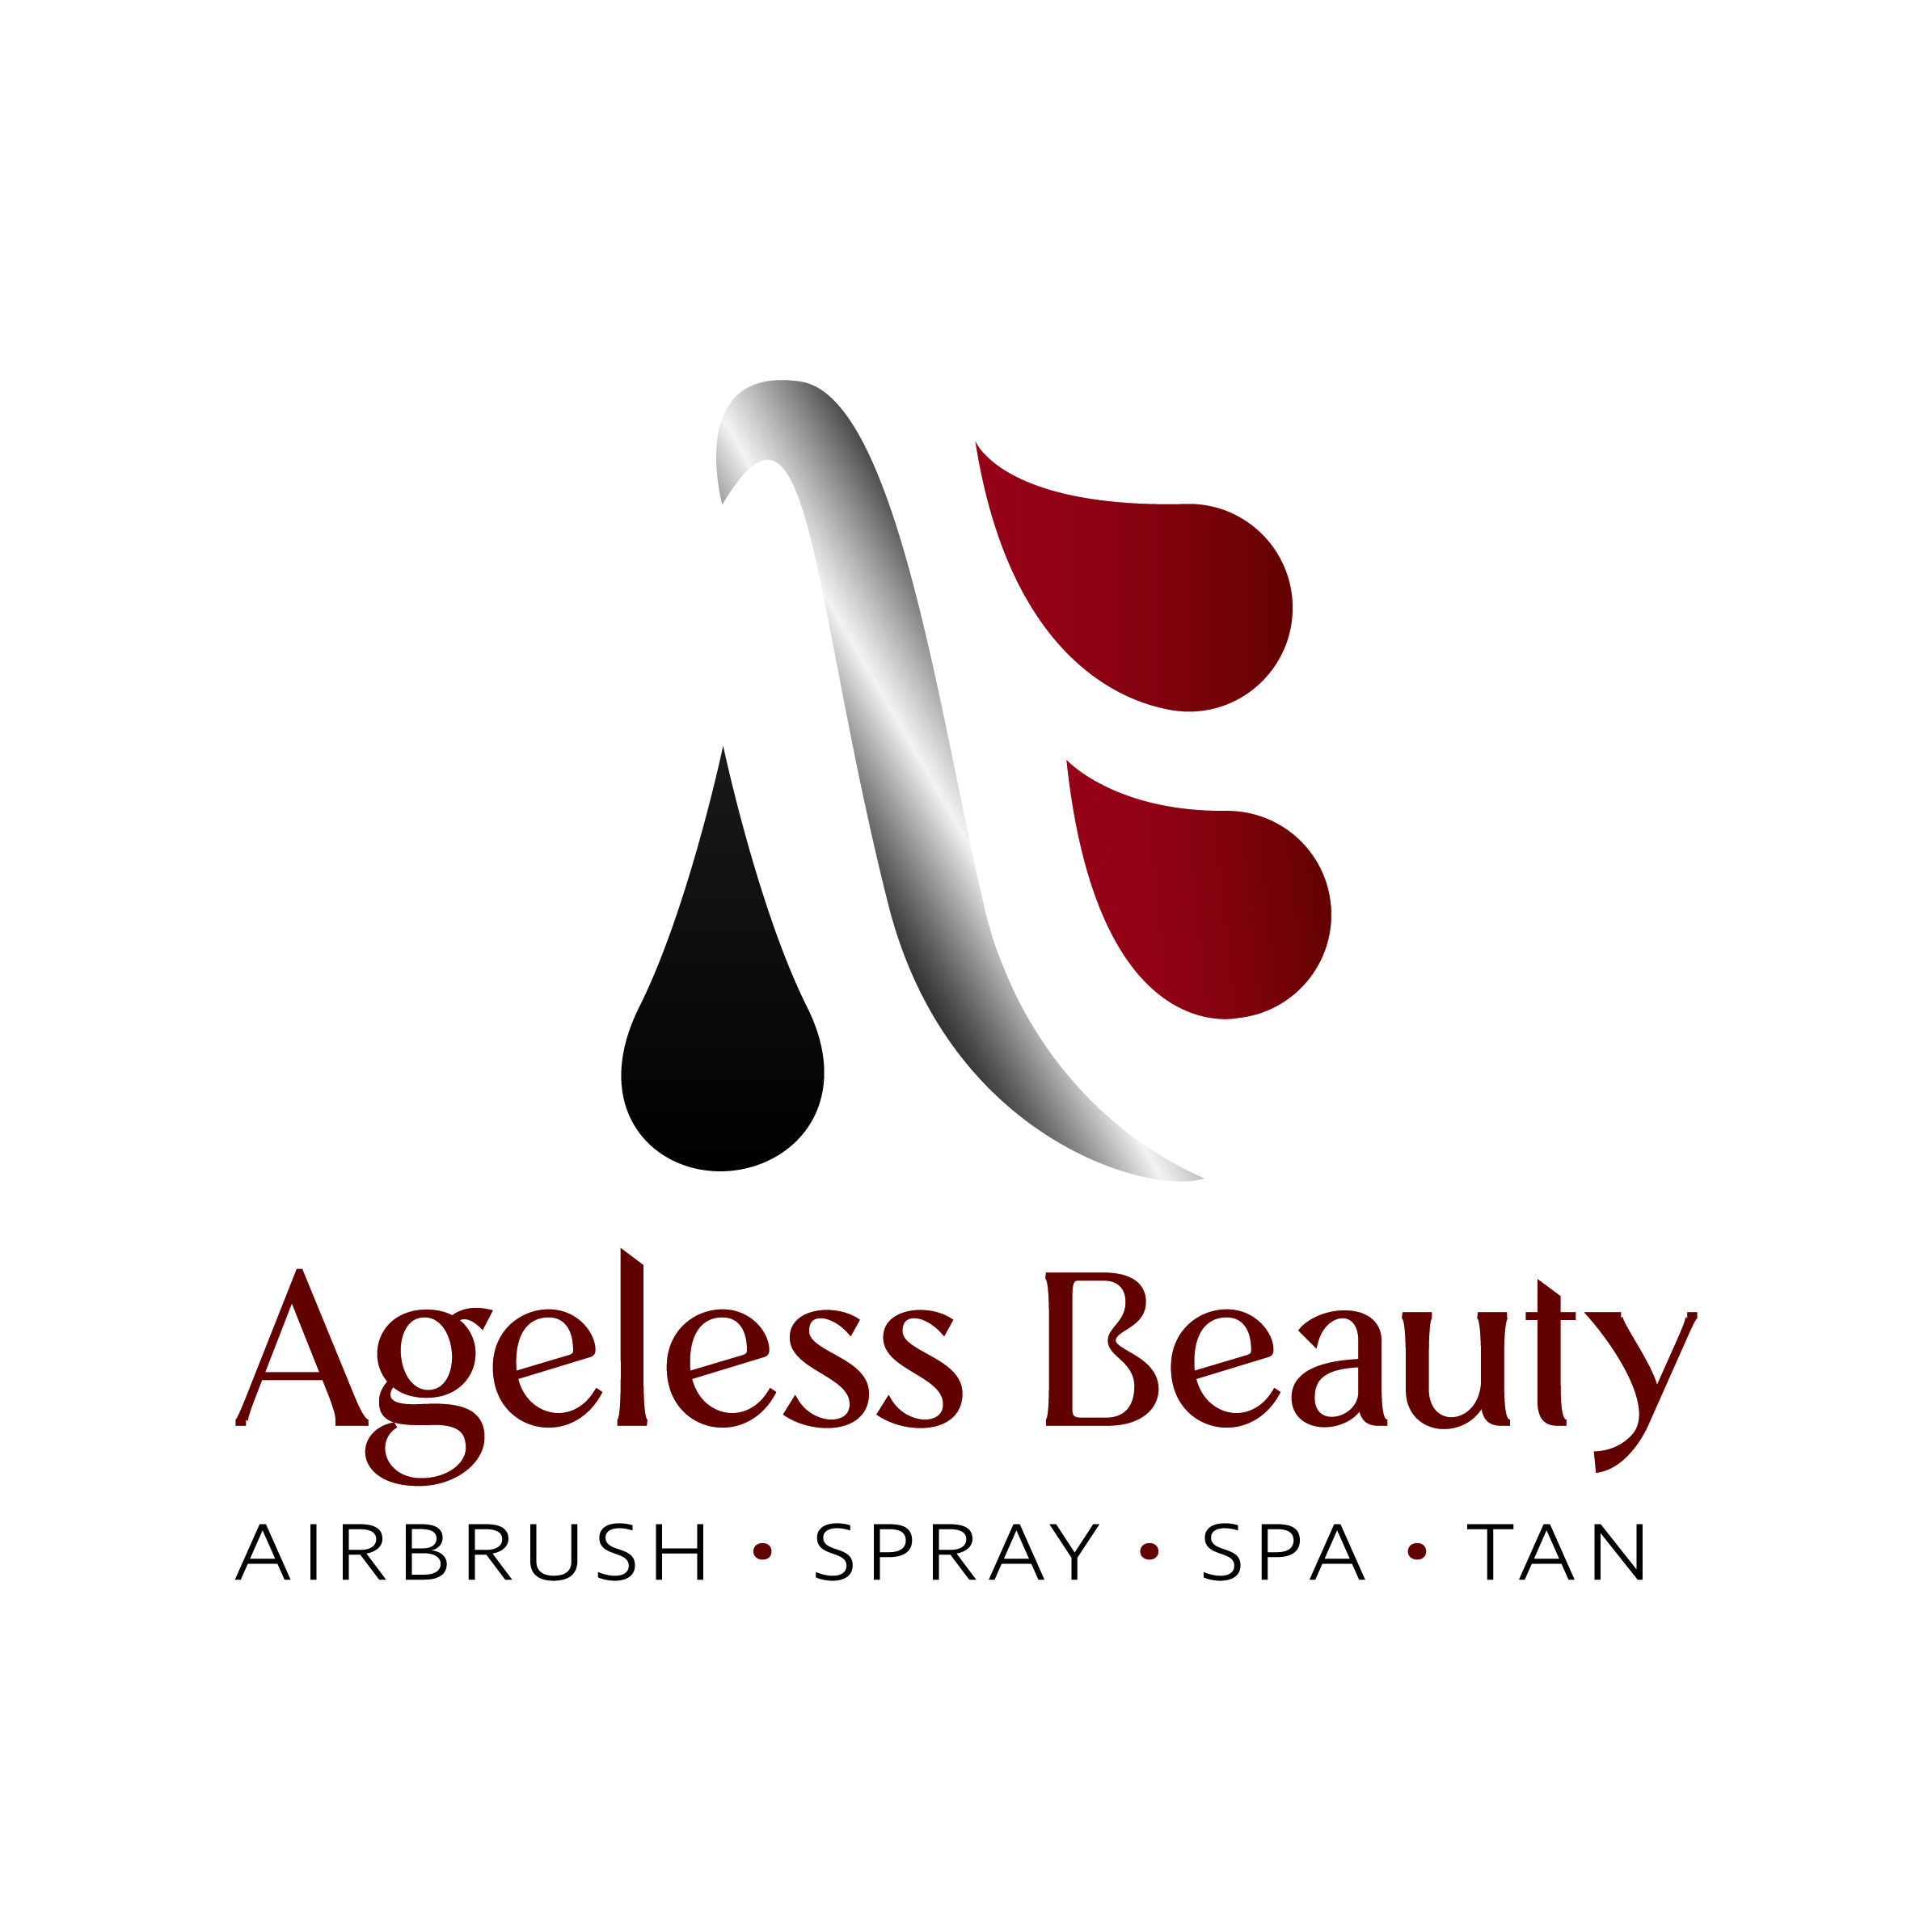 Ageless Beauty Logo logo design by logo designer Neon Pig Creative for your inspiration and for the worlds largest logo competition